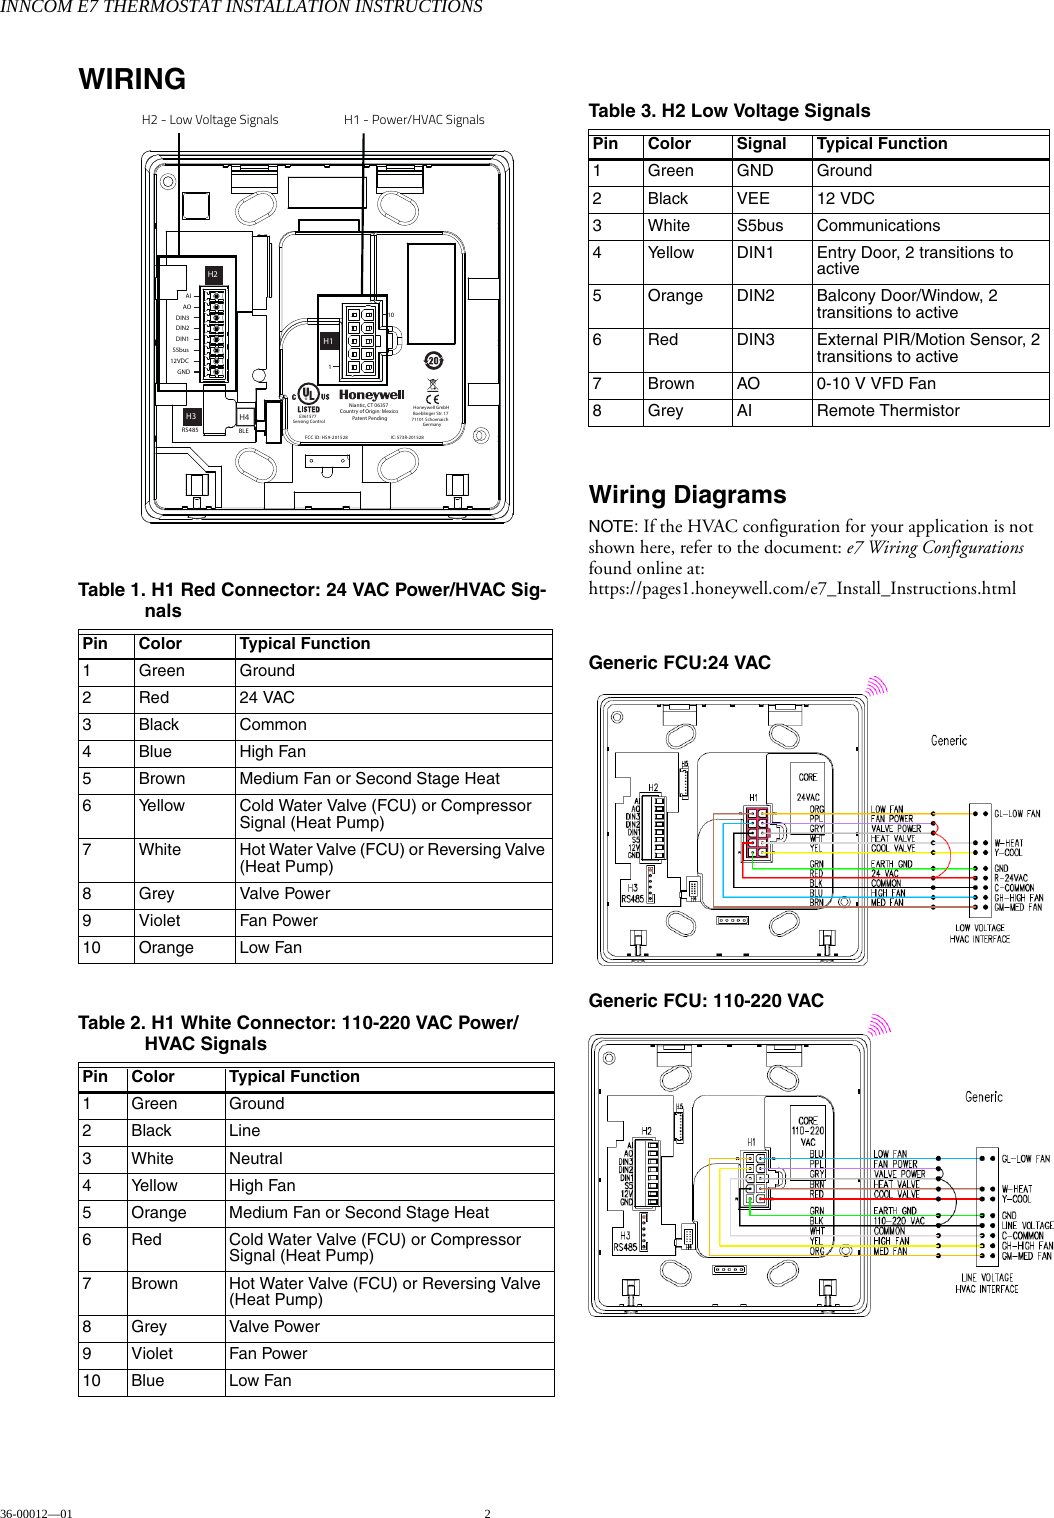 INNCOM E7 THERMOSTAT INSTALLATION INSTRUCTIONS36-00012—01 2WIRINGWiring DiagramsNOTE: If the HVAC configuration for your application is not shown here, refer to the document: e7 Wiring Configurations found online at:  https://pages1.honeywell.com/e7_Install_Instructions.htmlGeneric FCU:24 VAC  Generic FCU: 110-220 VAC Table 1. H1 Red Connector: 24 VAC Power/HVAC Sig-nalsPin Color Typical Function1 Green Ground2 Red 24 VAC3 Black Common4Blue High Fan5 Brown Medium Fan or Second Stage Heat6 Yellow Cold Water Valve (FCU) or Compressor Signal (Heat Pump)7 White Hot Water Valve (FCU) or Reversing Valve (Heat Pump)8Grey Valve Power9 Violet Fan Power10 Orange Low FanTable 2. H1 White Connector: 110-220 VAC Power/HVAC SignalsPin Color Typical Function1 Green Ground2 Black Line3 White Neutral4 Yellow High Fan5 Orange Medium Fan or Second Stage Heat6 Red Cold Water Valve (FCU) or Compressor Signal (Heat Pump)7 Brown Hot Water Valve (FCU) or Reversing Valve (Heat Pump)8Grey Valve Power9 Violet Fan Power10 Blue Low FanH1FCC ID: HS9-201528Niantic, CT 06357Country of Origin: MexicoPatent PendingAI110AODIN3DIN2DIN1S5bus12VDCGNDIC: 573R-201528BLEH4RS485H1H3H2Honeywell GmbHBoeblinger Str. 1771101 SchoenaichGermanyE361577Sensing ControlH2 - Low Voltage Signals H1 - Power/HVAC SignalsTable 3. H2 Low Voltage SignalsPin Color Signal Typical Function 1 Green GND Ground2 Black VEE 12 VDC3 White S5bus Communications4 Yellow DIN1 Entry Door, 2 transitions to active5 Orange DIN2 Balcony Door/Window, 2 transitions to active6 Red DIN3 External PIR/Motion Sensor, 2 transitions to active7 Brown AO 0-10 V VFD Fan8 Grey AI Remote Thermistor